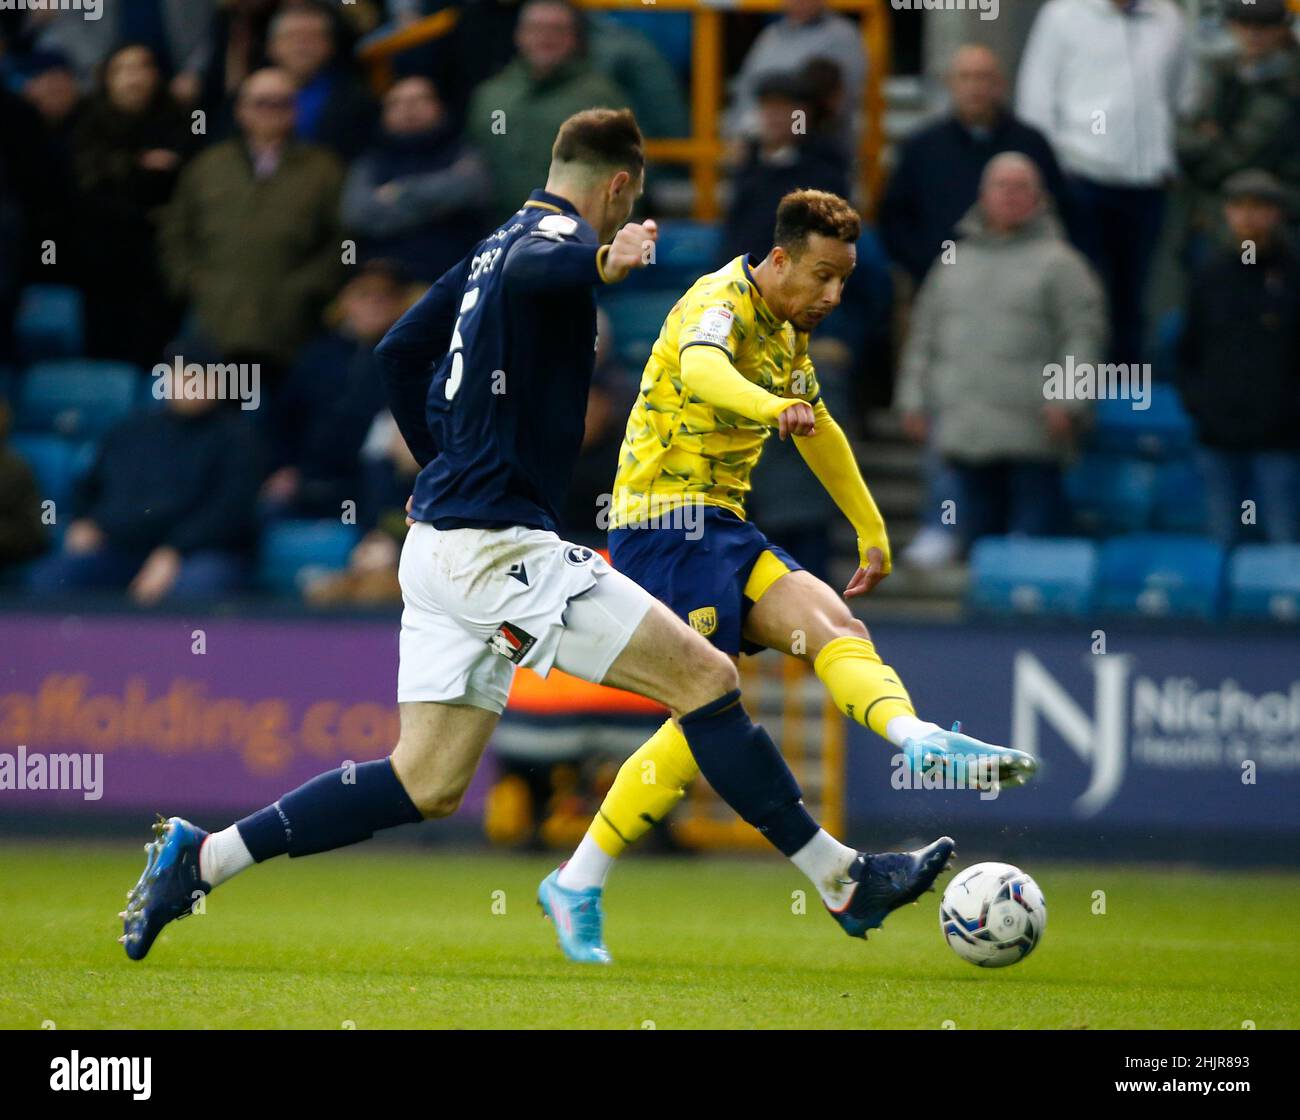 LONDON, United Kingdom, JANUARY 29: Callum Robinson of West Bromwich Albion during The Sky Bet Championship between Millwall and West Bromwich Albion Stock Photo